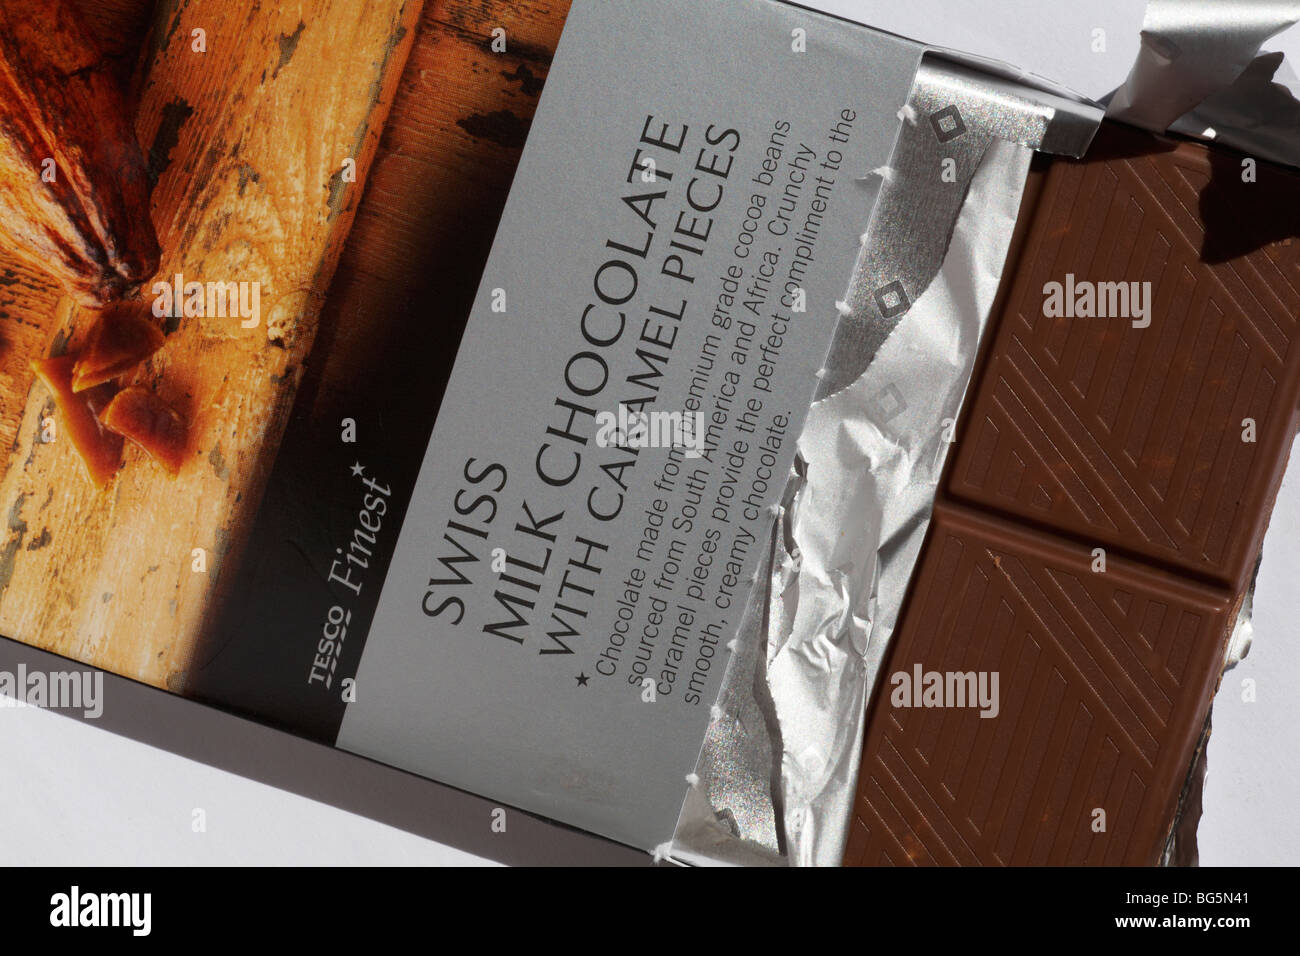 partly unwrapped bar of Tesco Finest Swiss Milk chocolate with caramel pieces Stock Photo